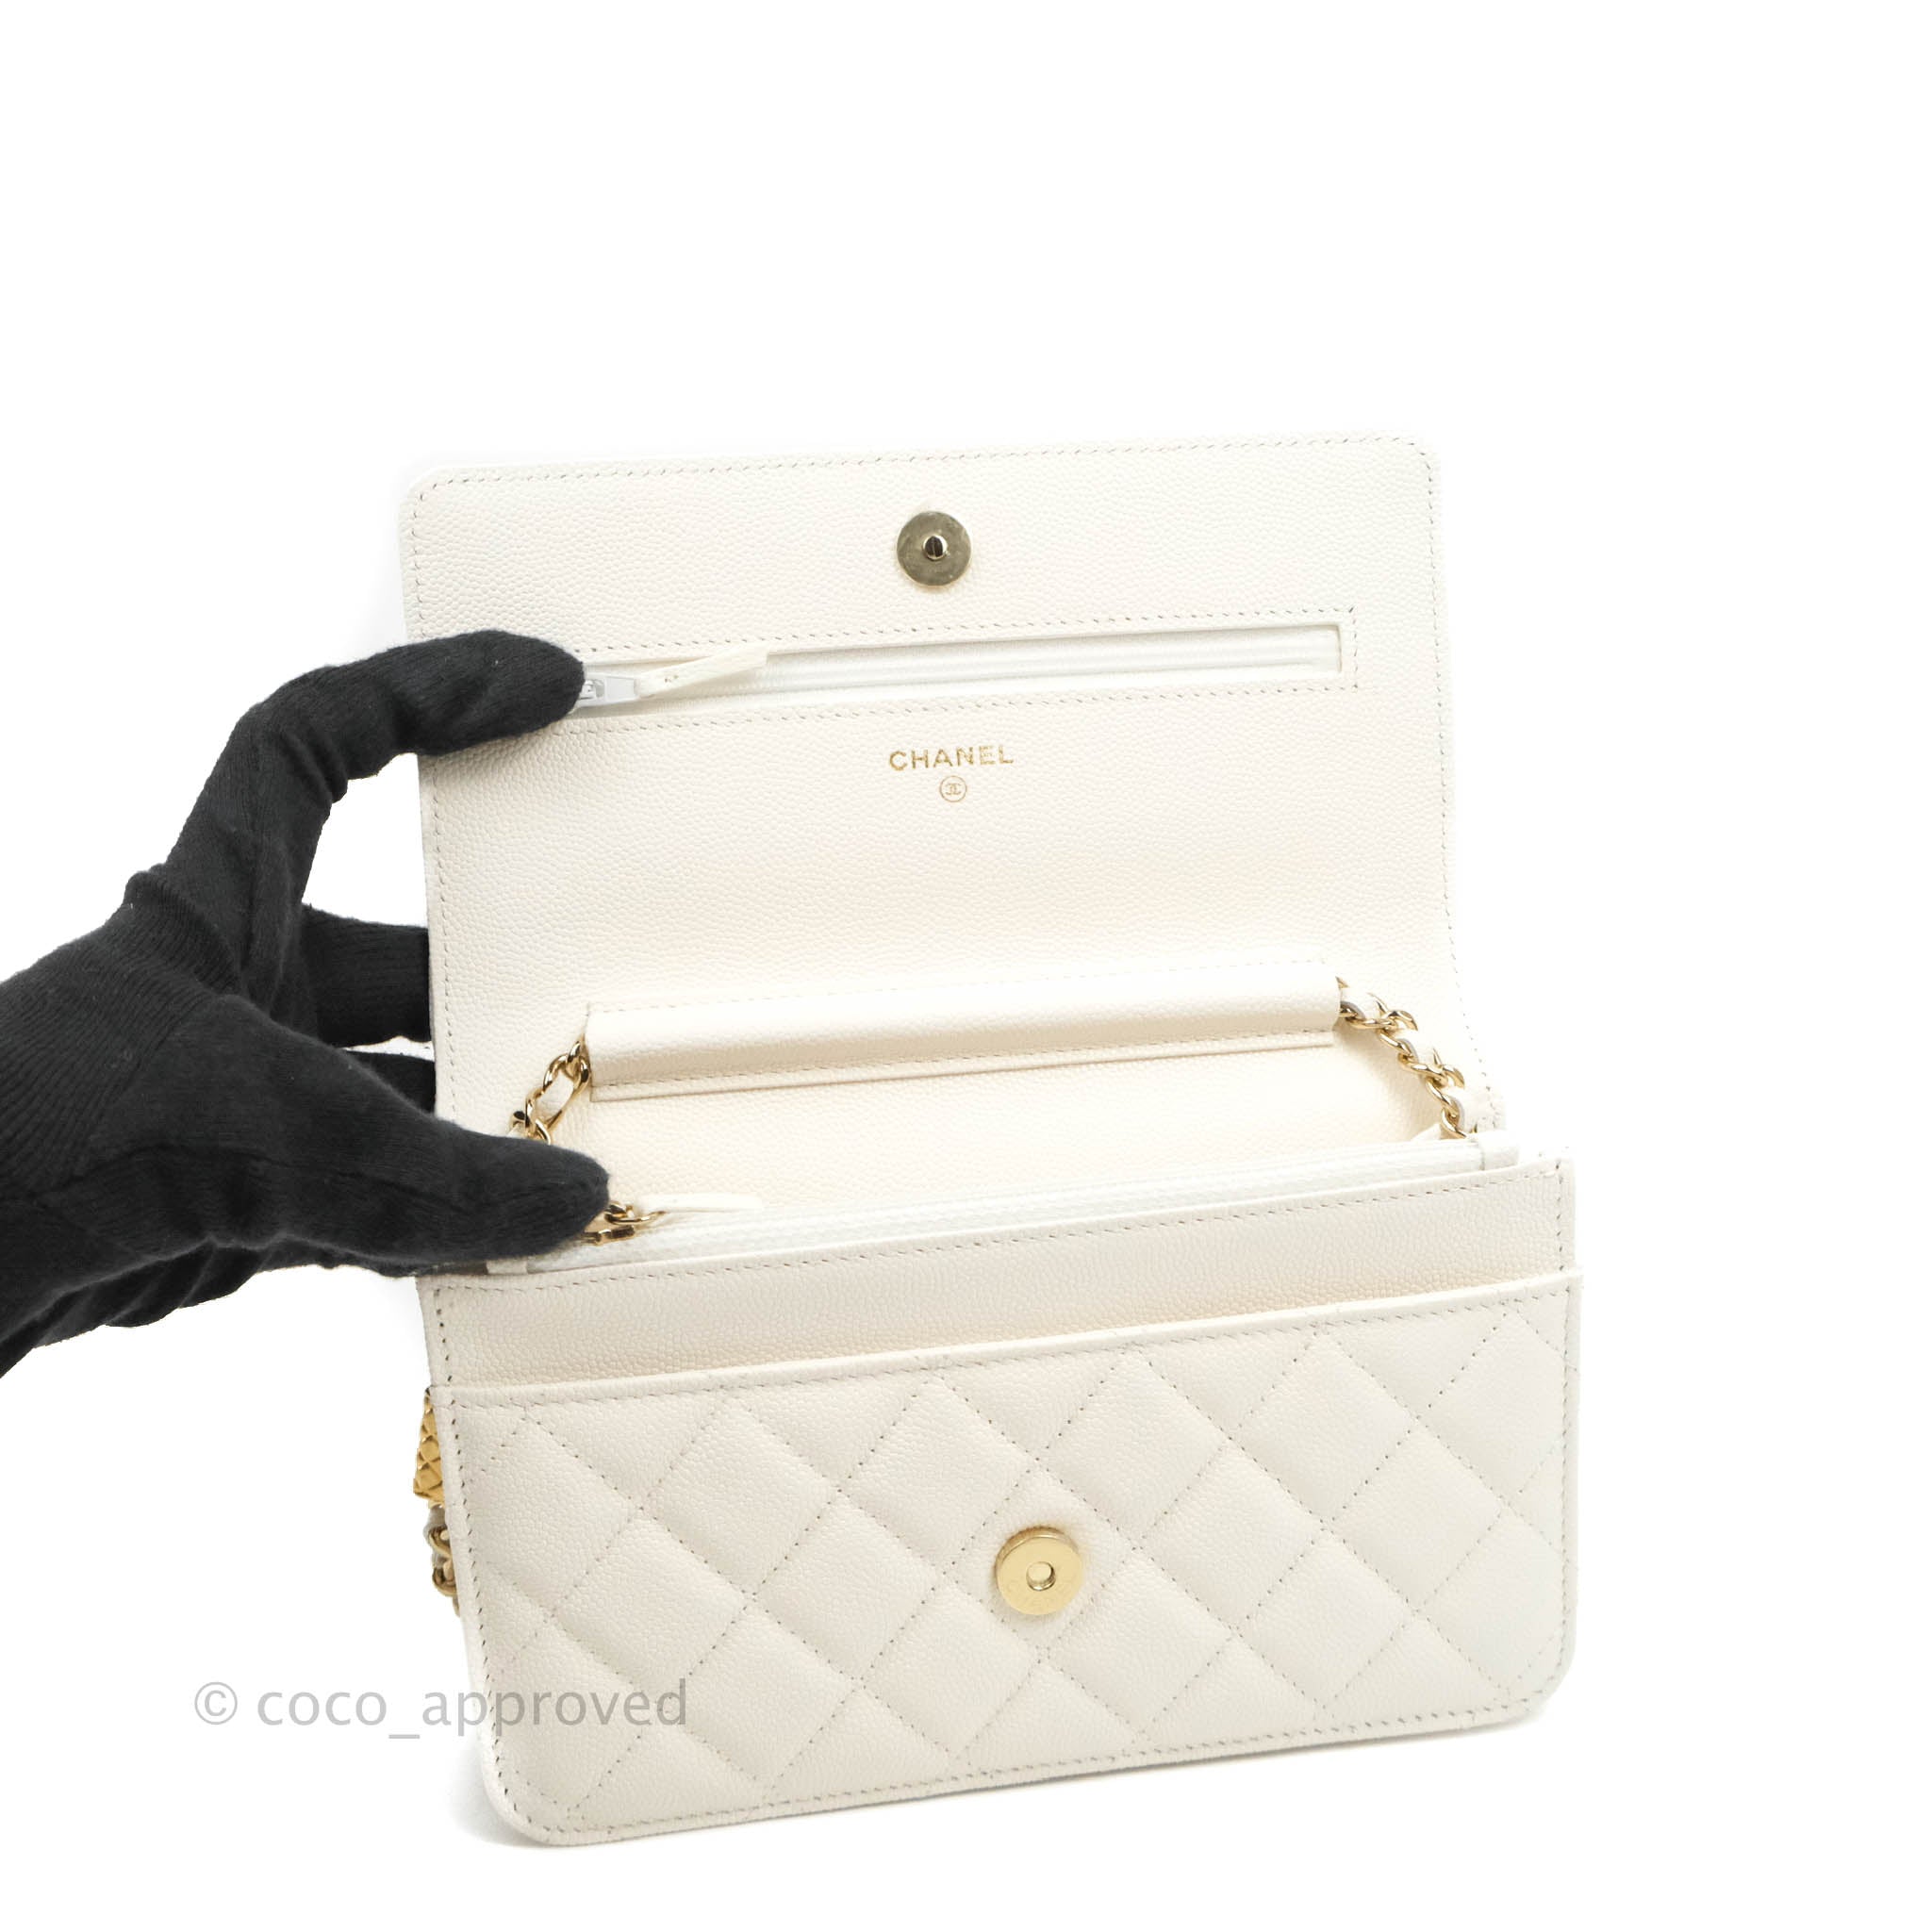 Chanel White Leather Reissue WOC Clutch Bag  Yoogis Closet